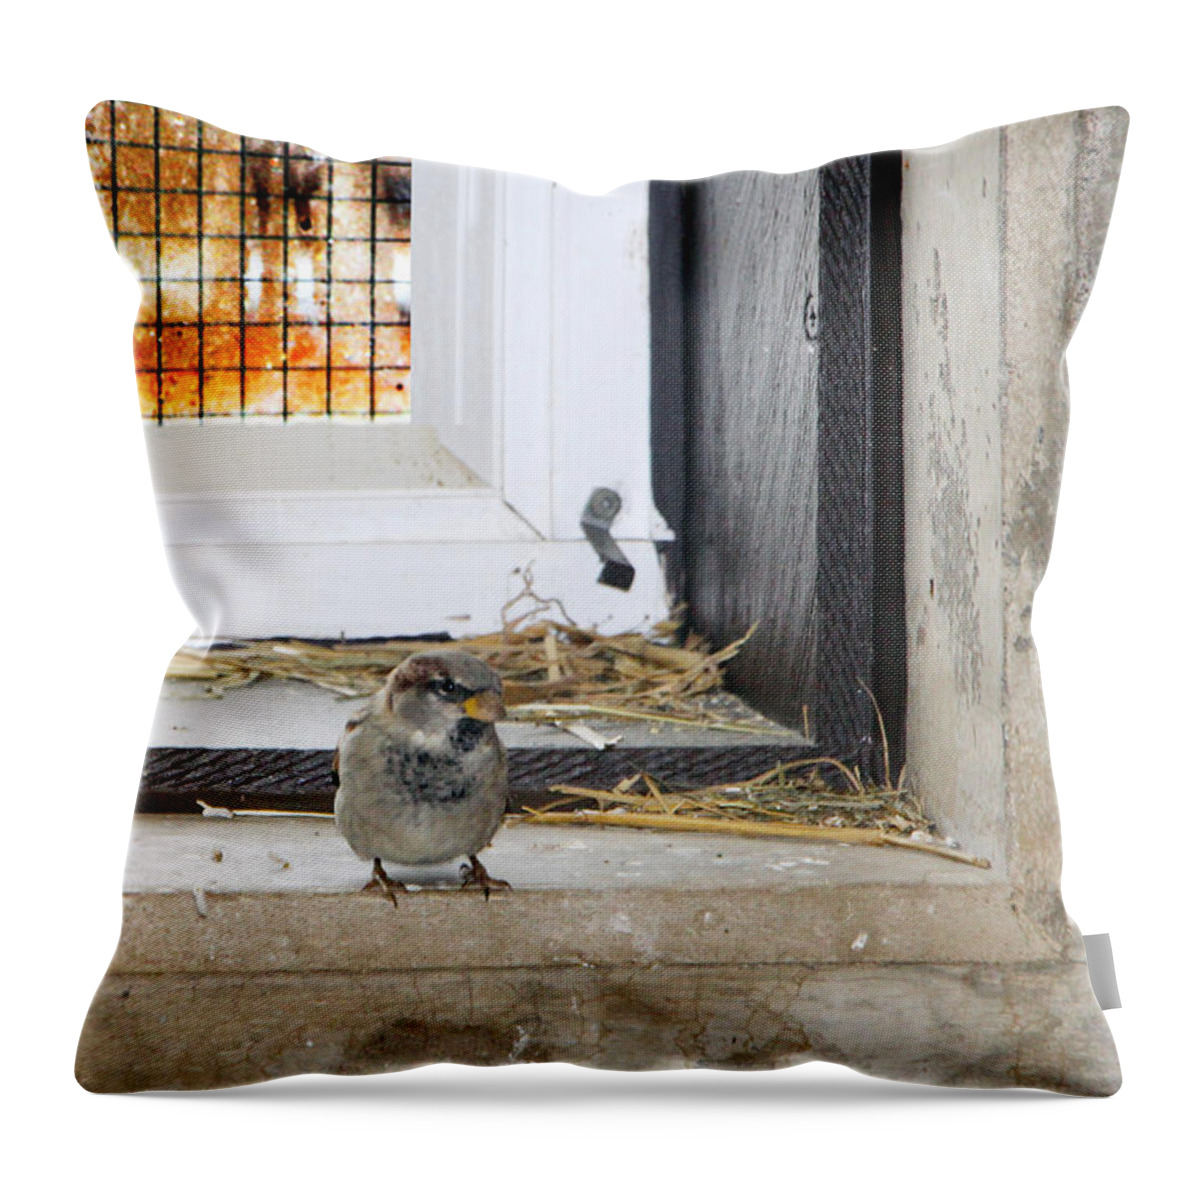 Redemption Throw Pillow featuring the photograph Redemption by Munir Alawi